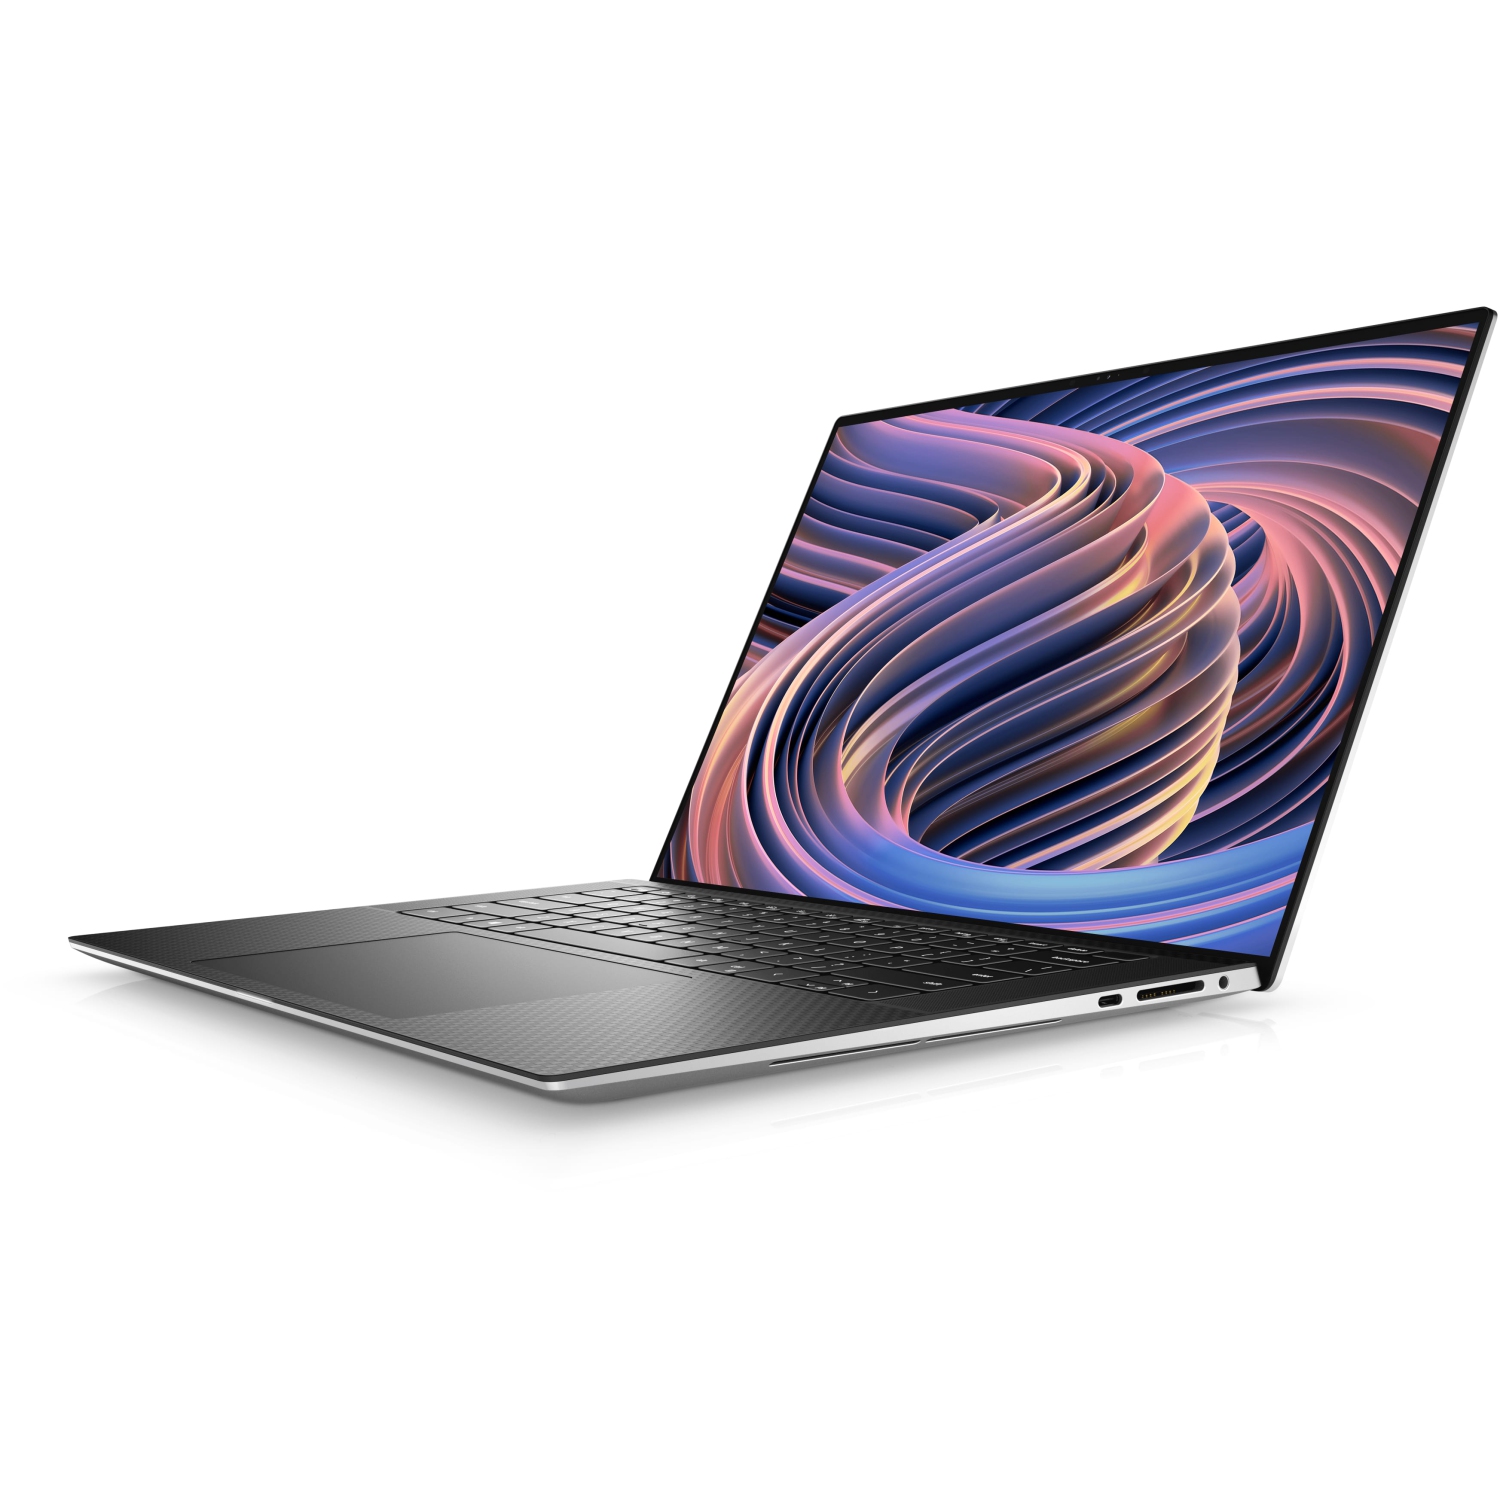 Refurbished (Excellent) – Dell XPS 9520 Laptop (2022) | 15.6" FHD+ | Core i7 - 2TB SSD - 64GB RAM - RTX 3050 | 14 Cores @ 4.7 GHz - 12th Gen CPU